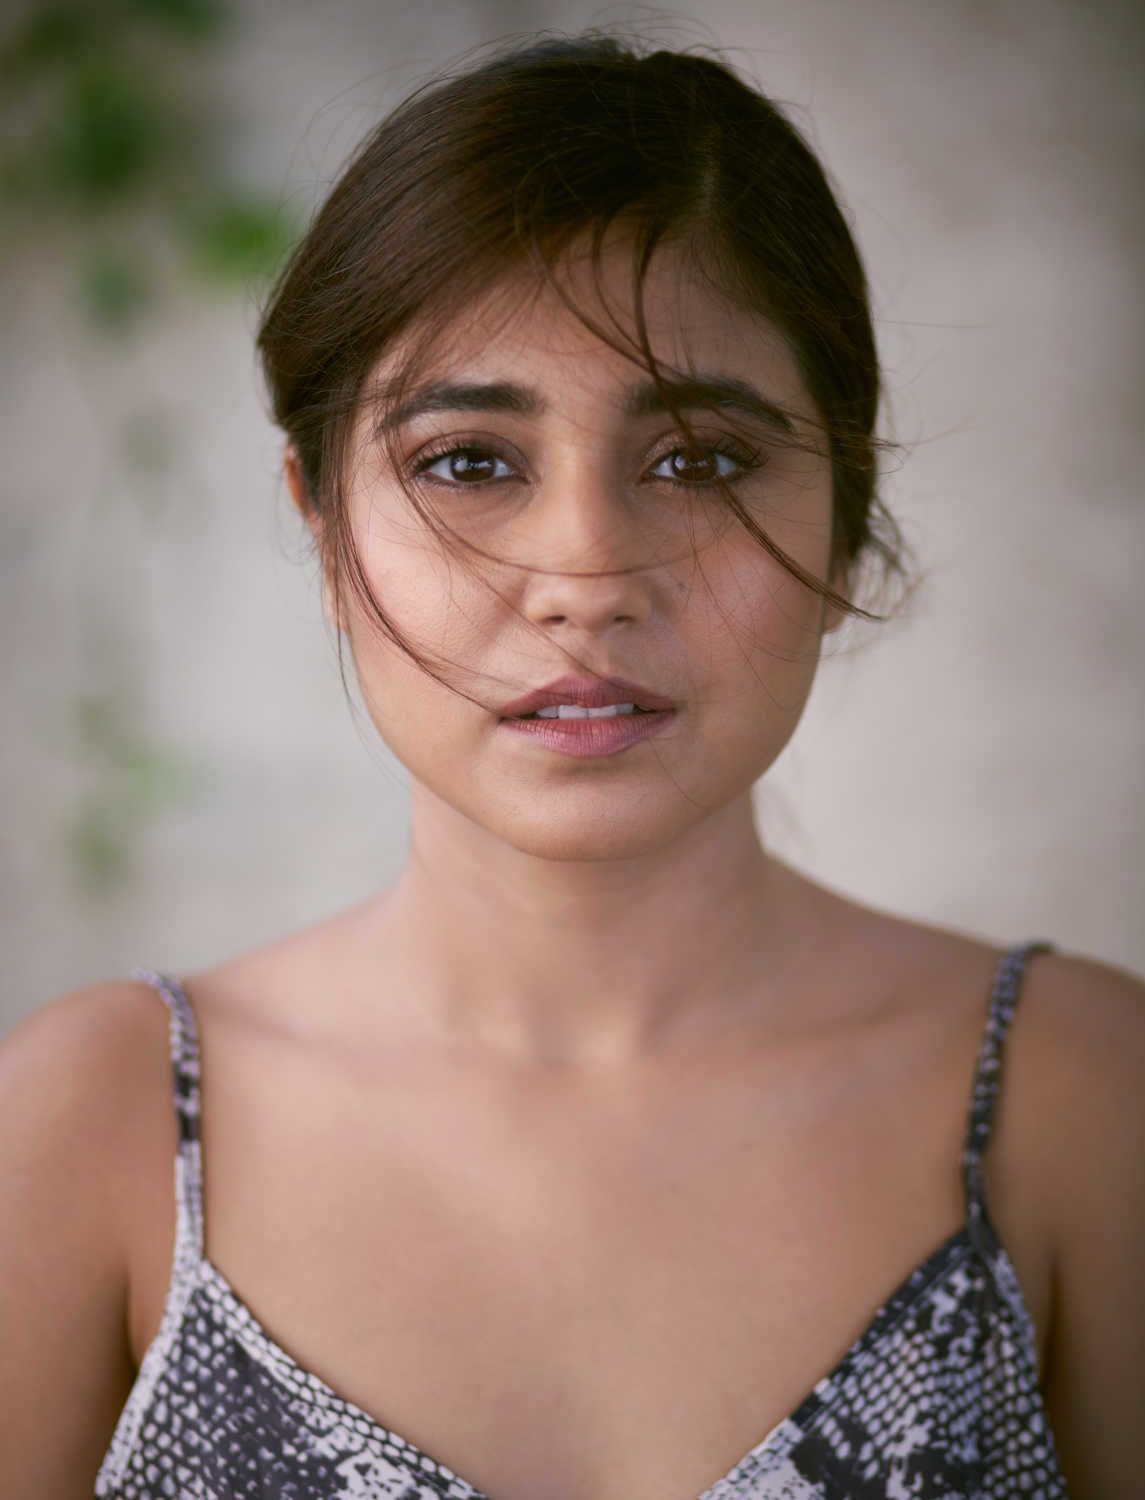 Shweta Tripathi  Height, Weight, Age, Stats, Wiki and More